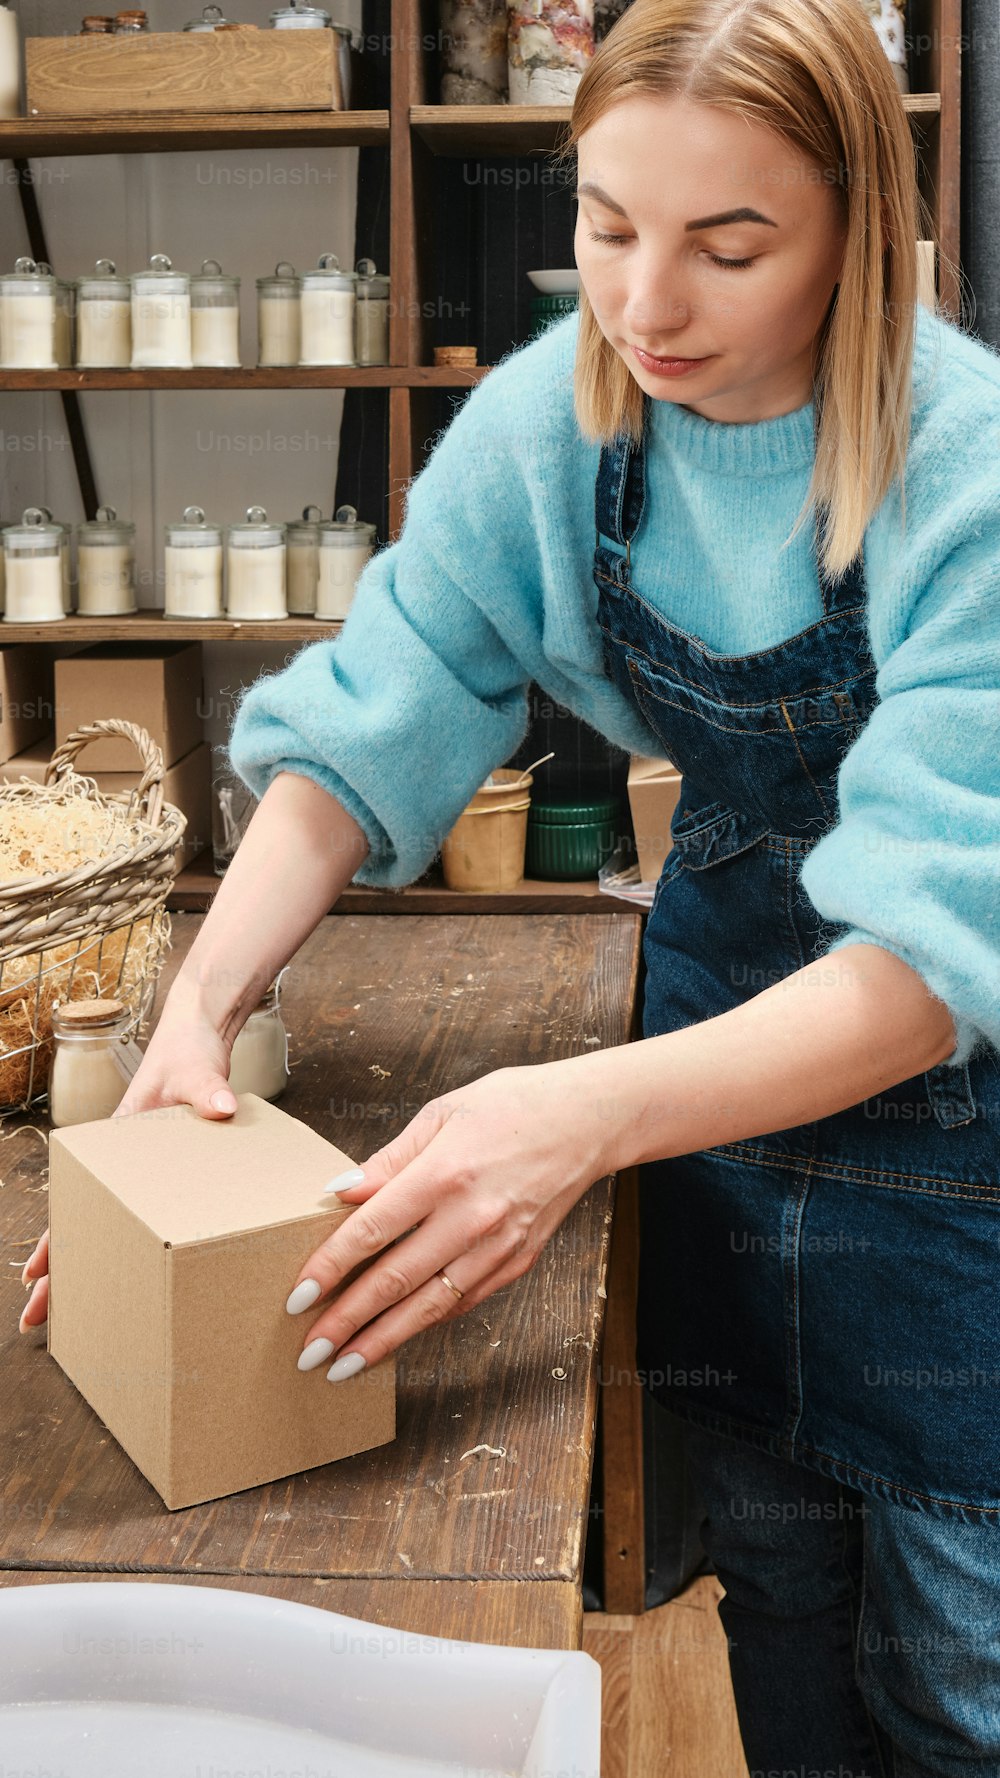 a woman in a blue sweater is putting something in a box